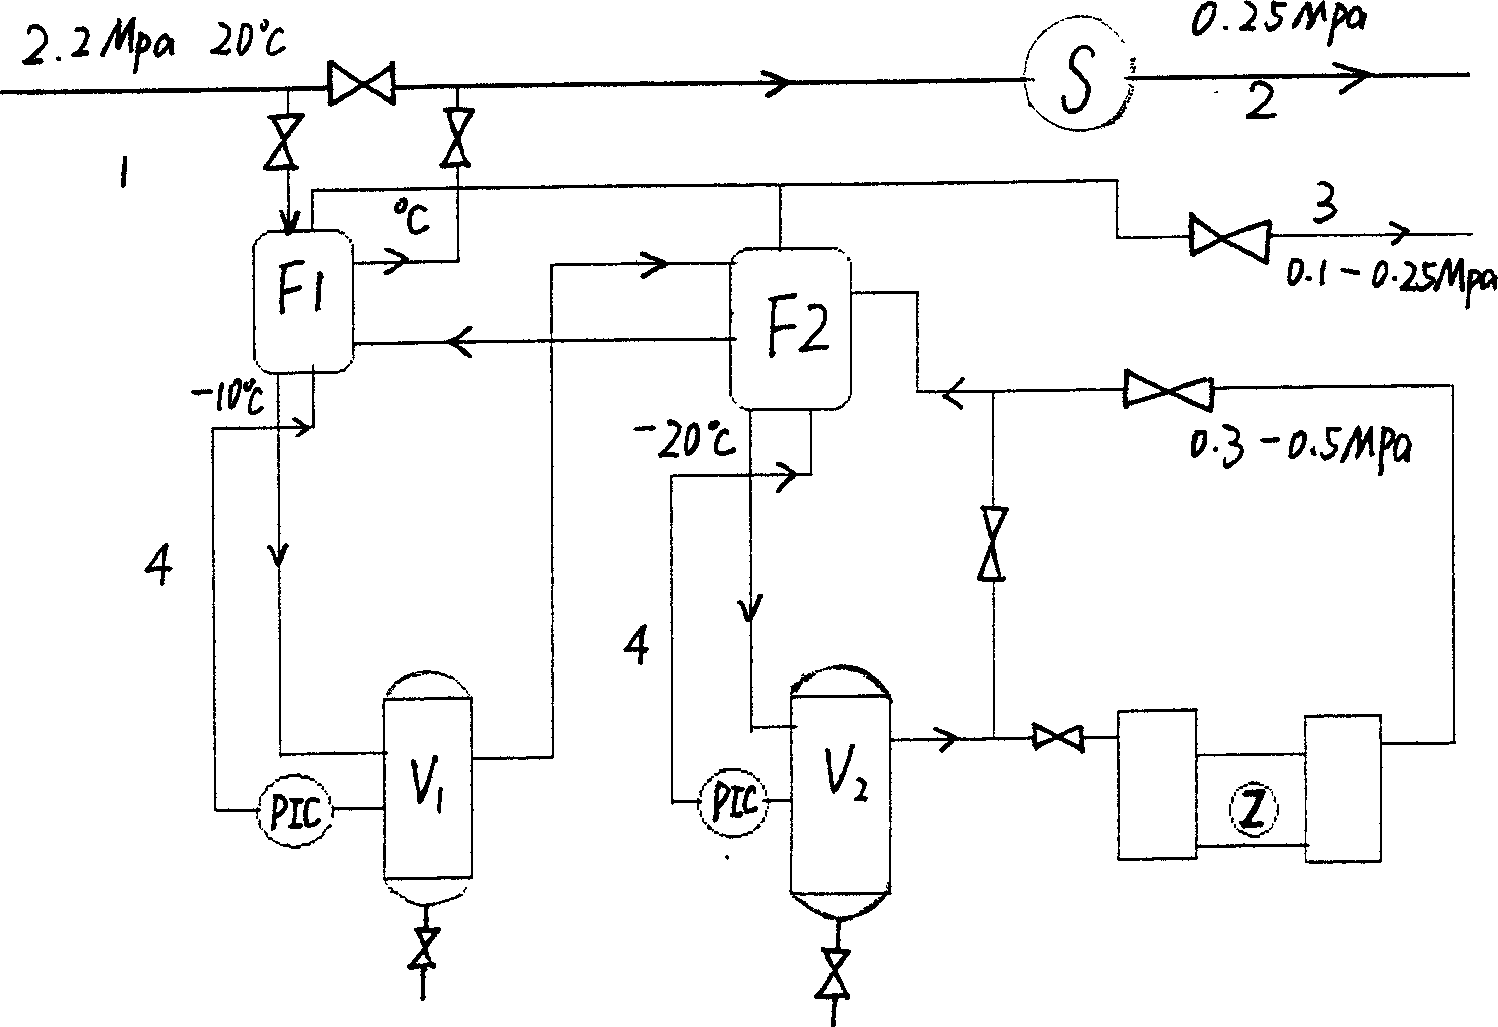 Method for recovering ammonia from purge gas